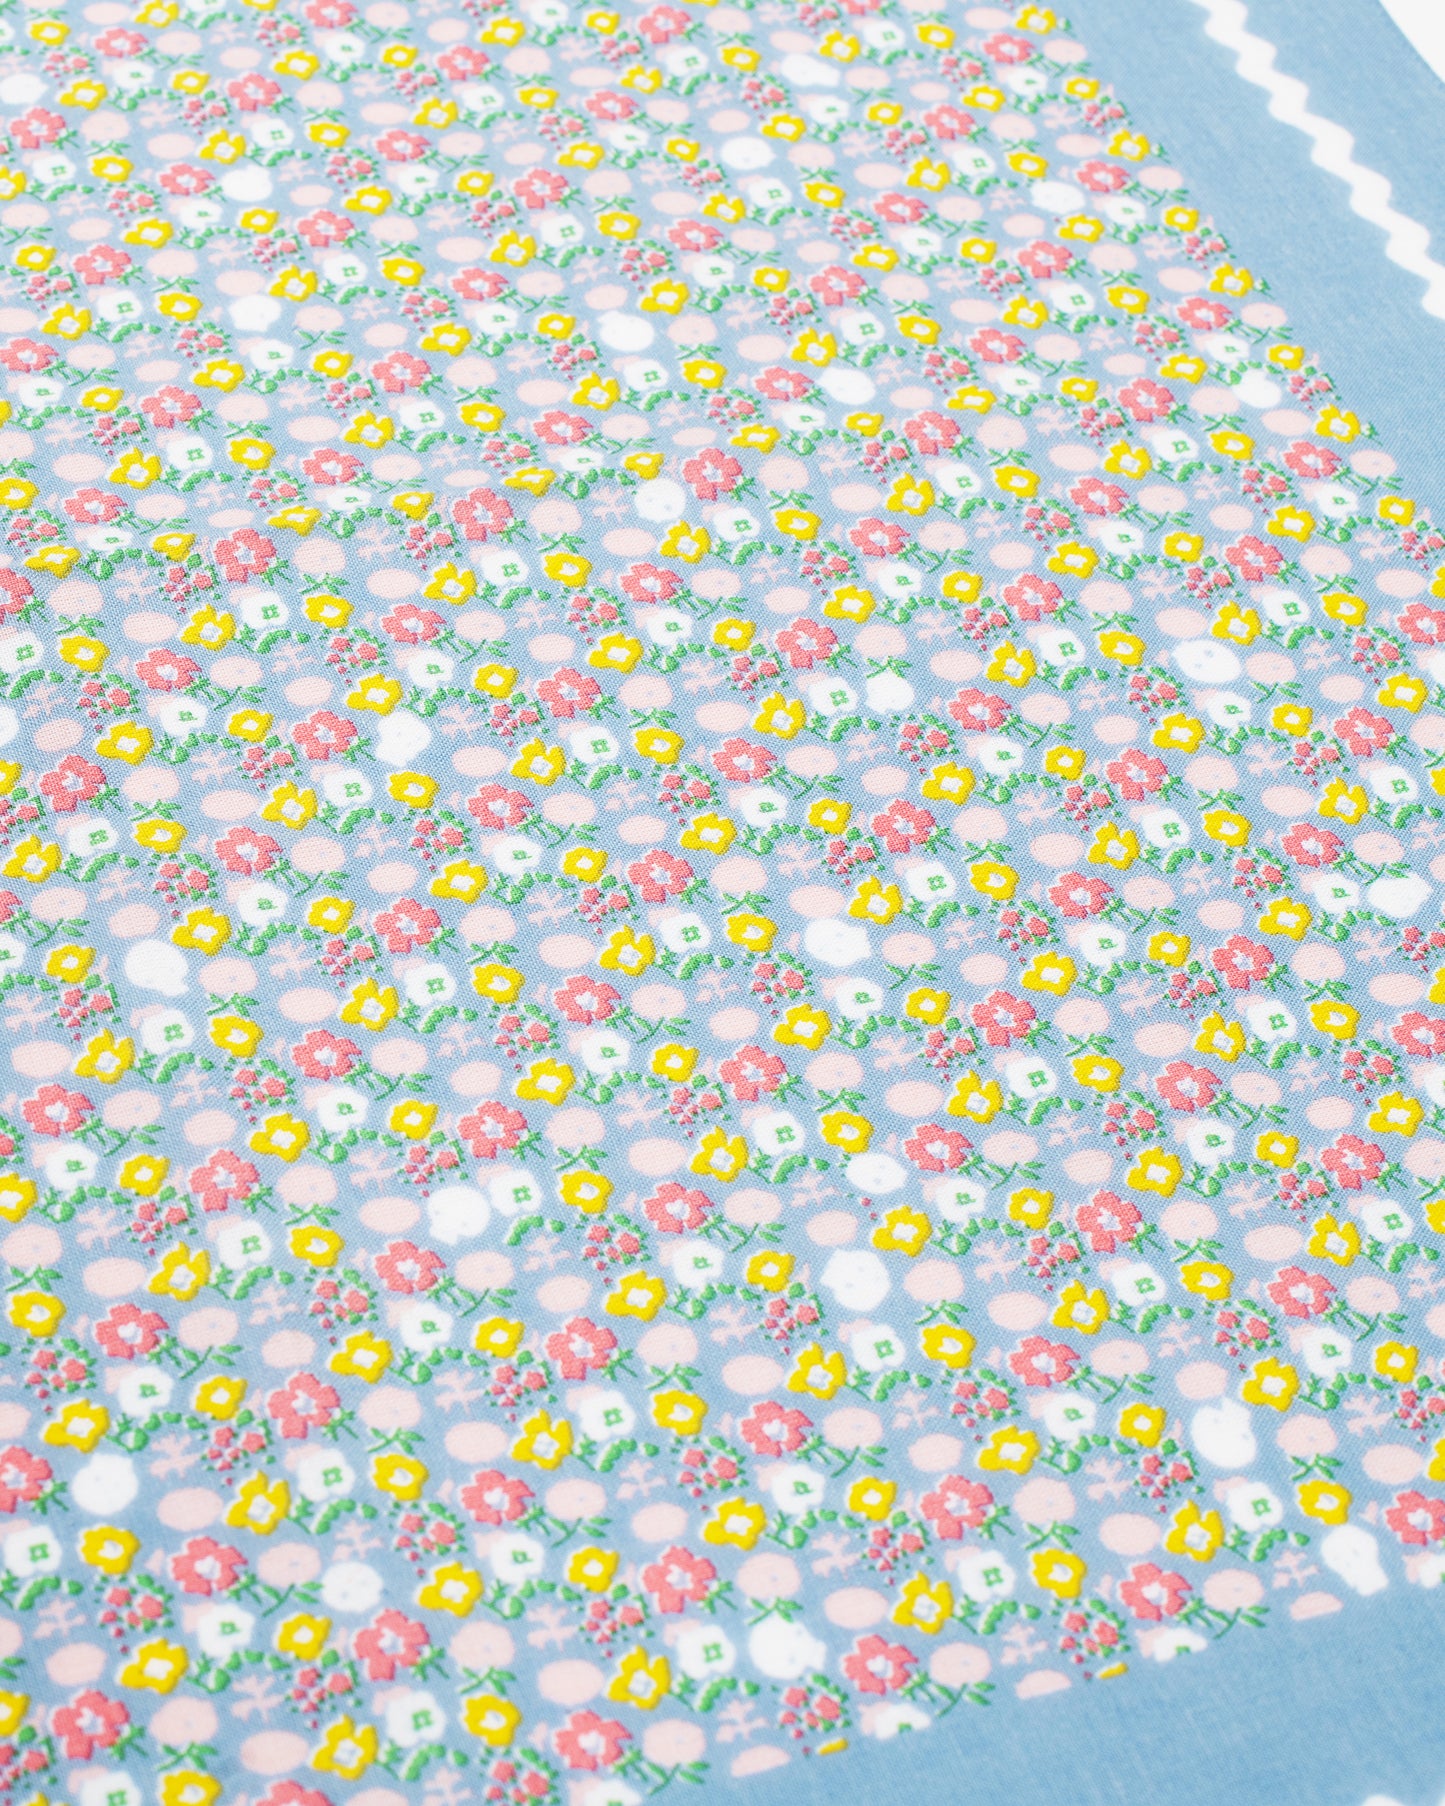 Don't let this pastel bandana fool you - there are tiny skulls hidden amongst the flowers.